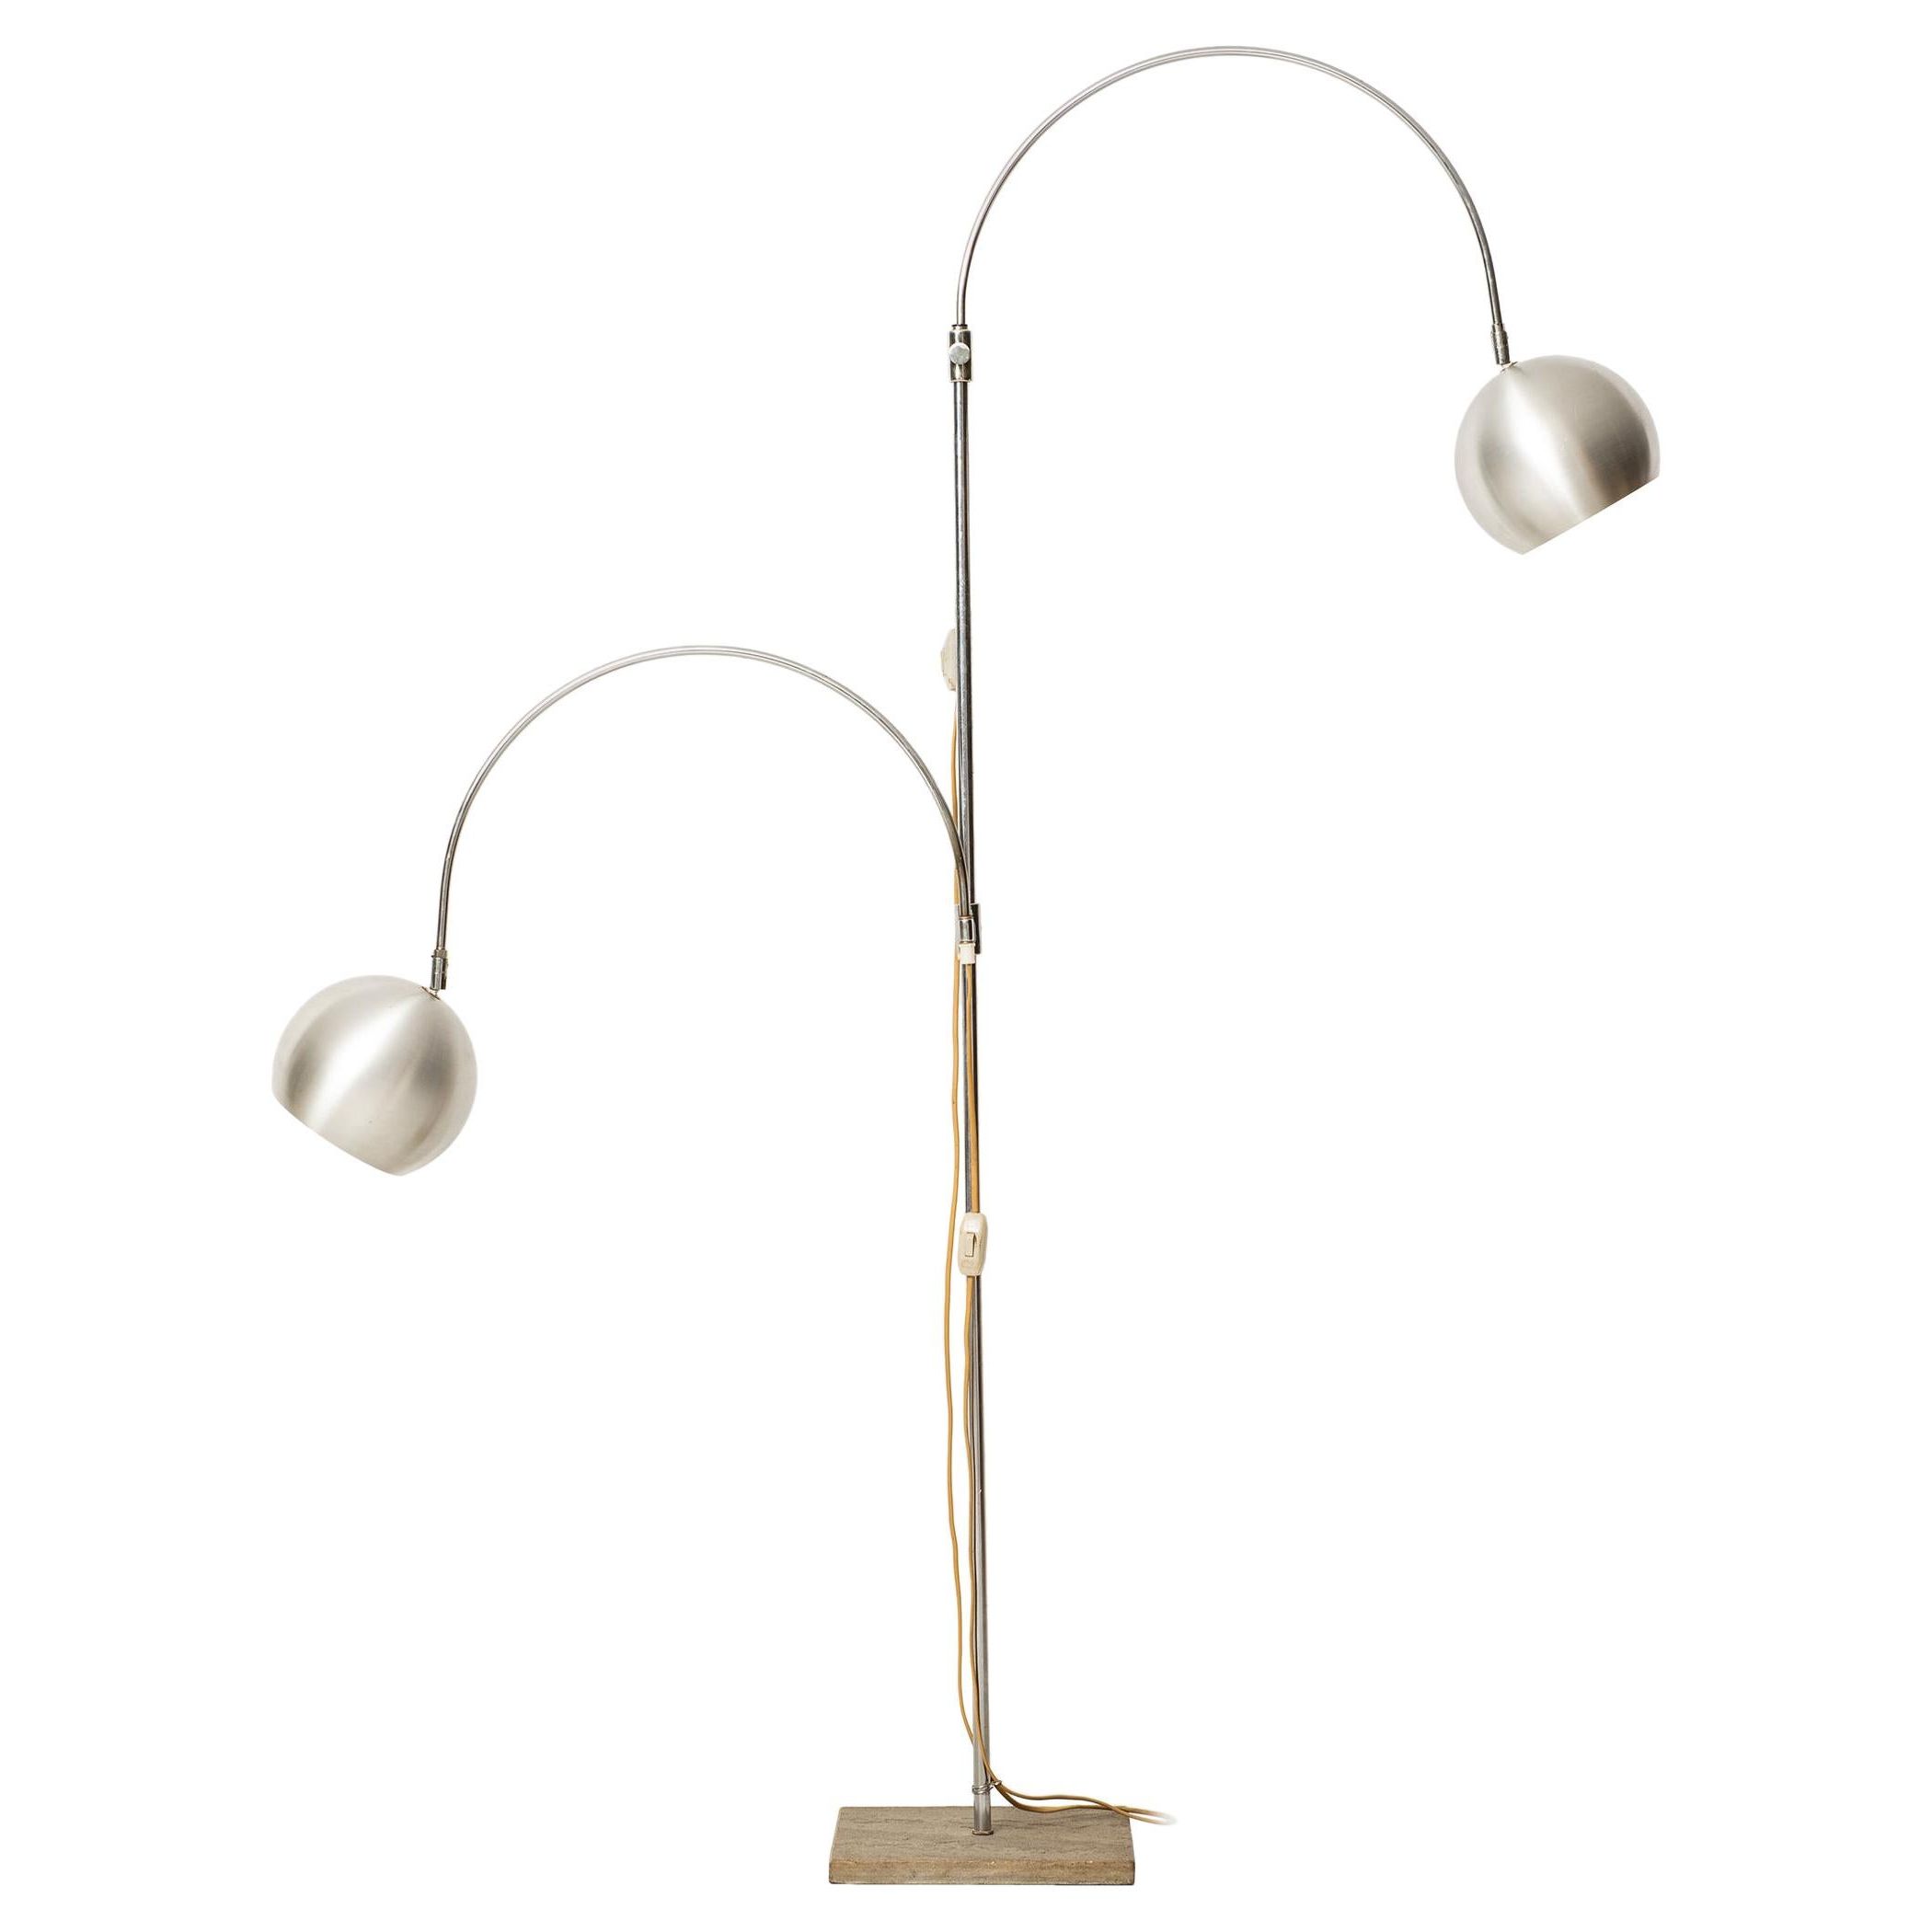 Large Floor Lamp With 2 Flexible Arms Produced In Italy For Sale At 1stdibs  | Floor Lamp With Flexible Arms, Flexible Floor Lamp, Bendable Floor Lamp Regarding 2 Arm Floor Lamps (View 4 of 20)